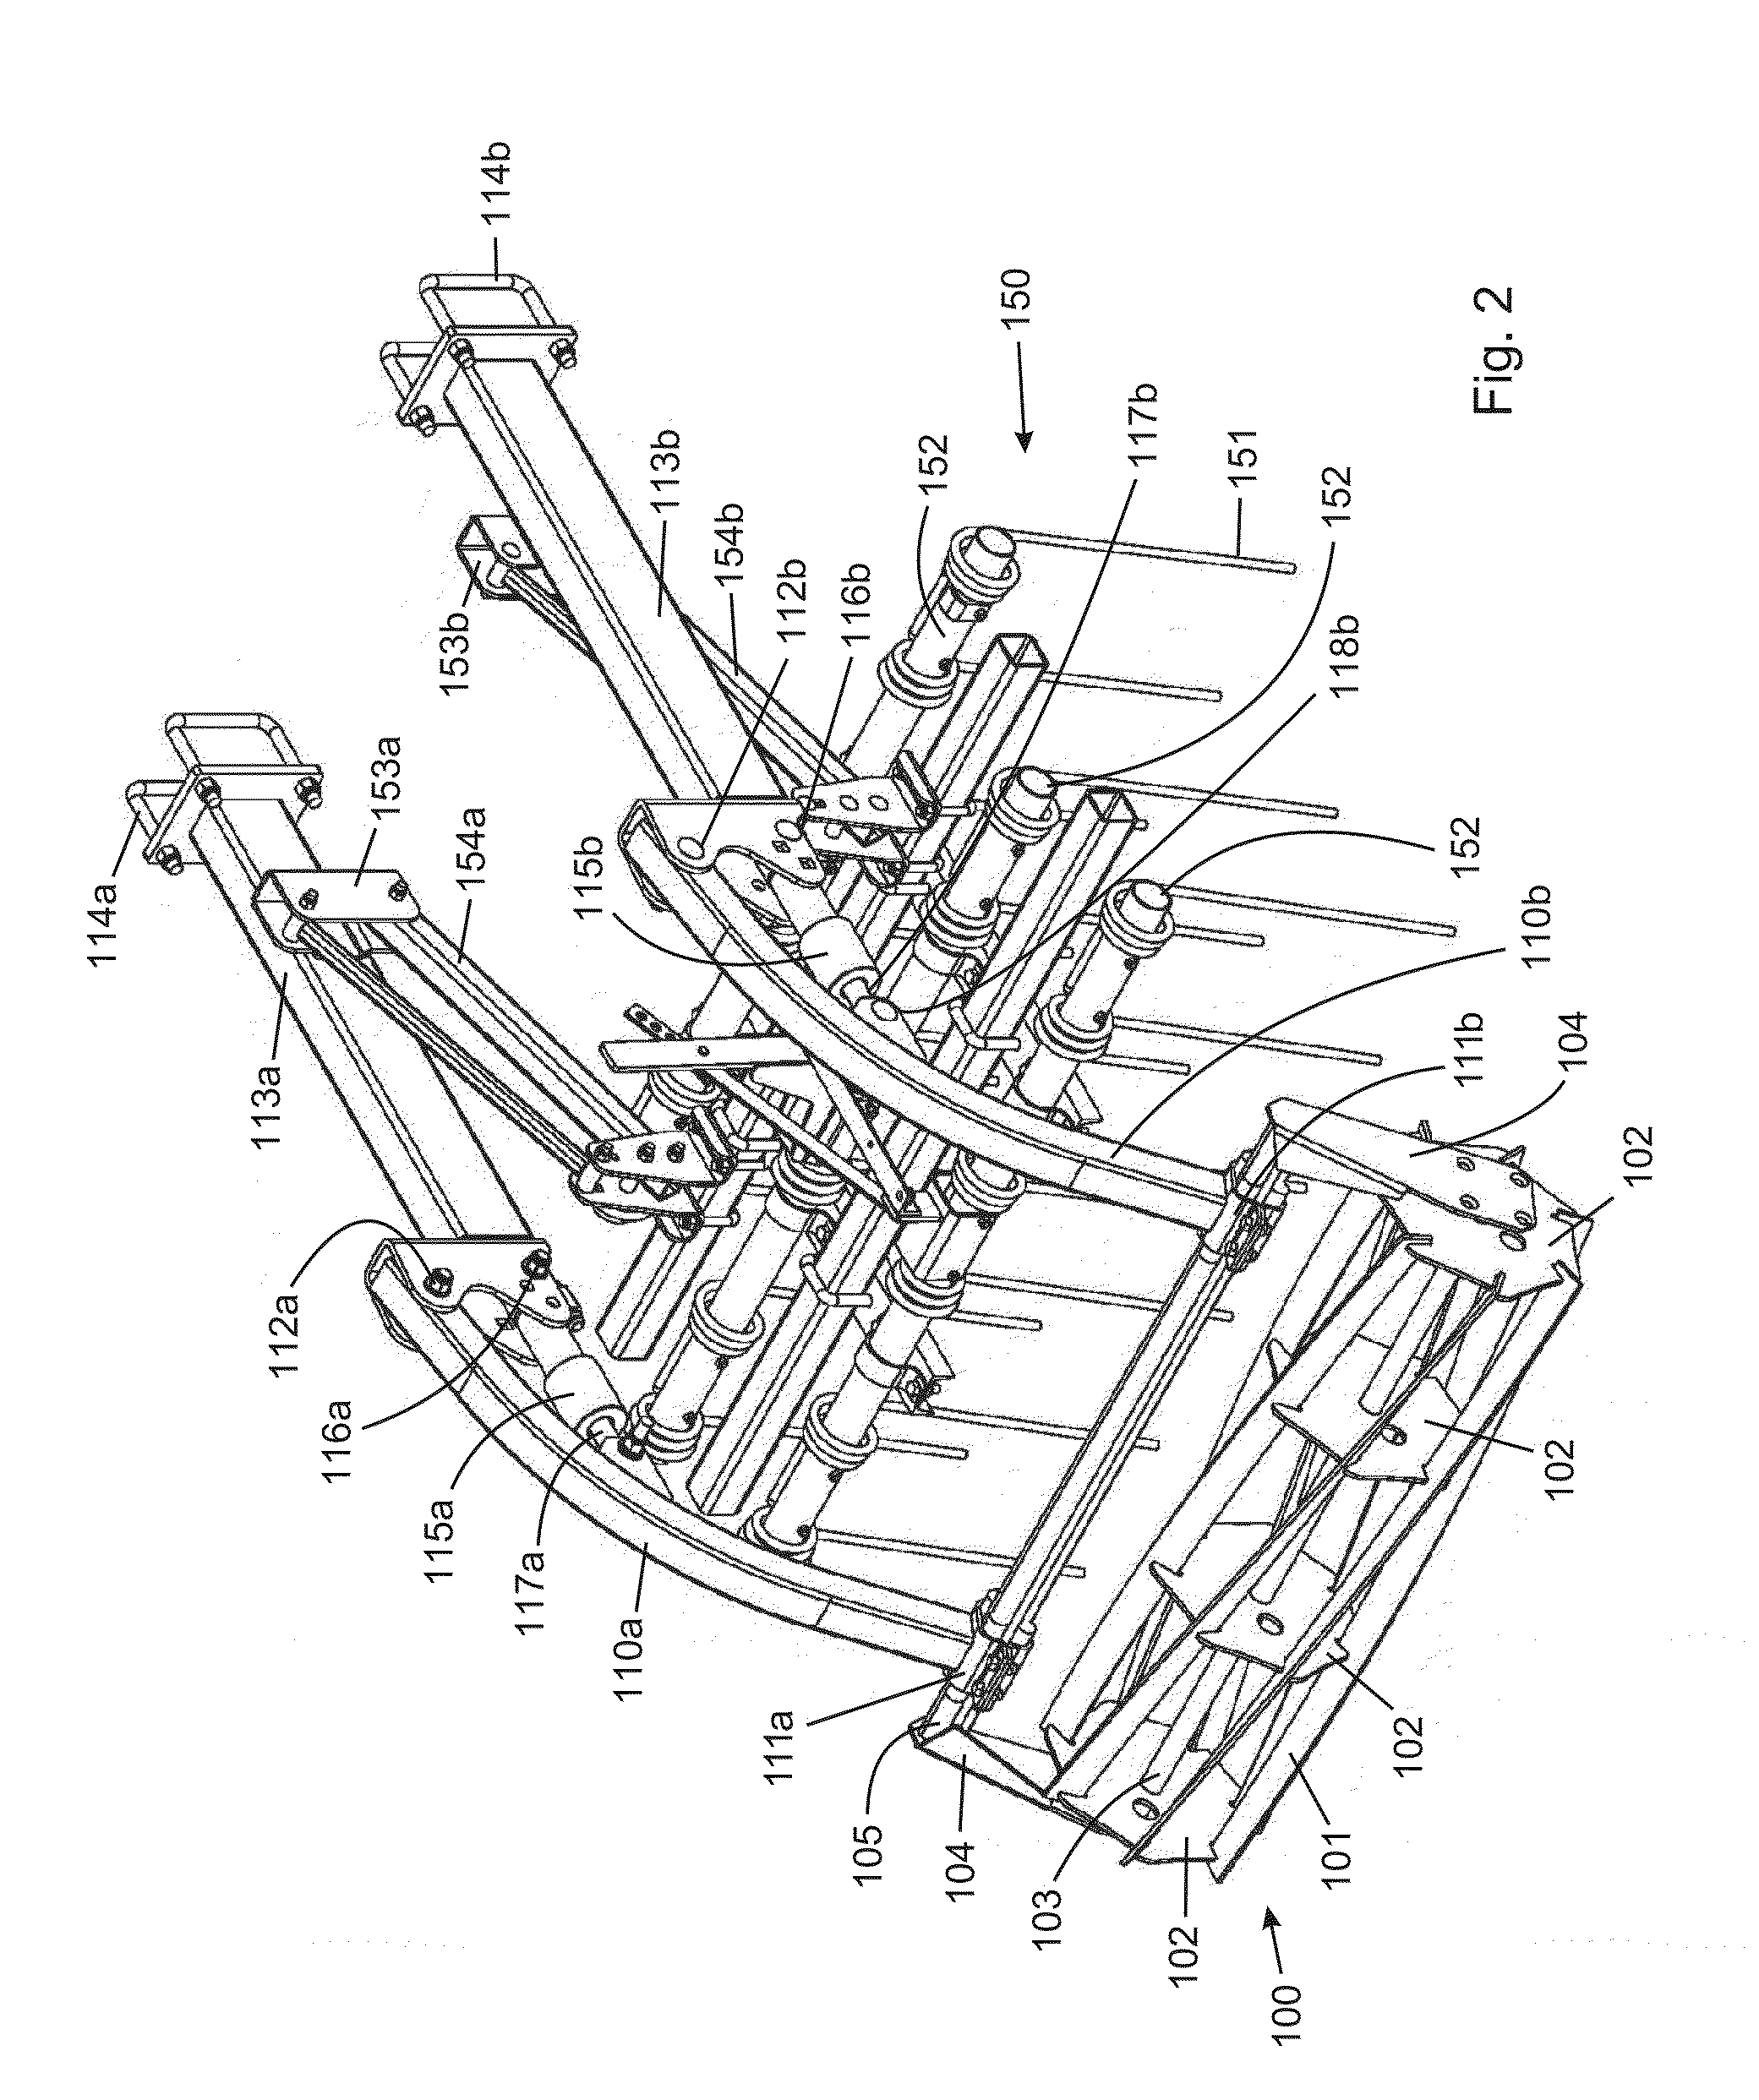 Hydraulically controlled rotary harrow for tillage apparatus and system